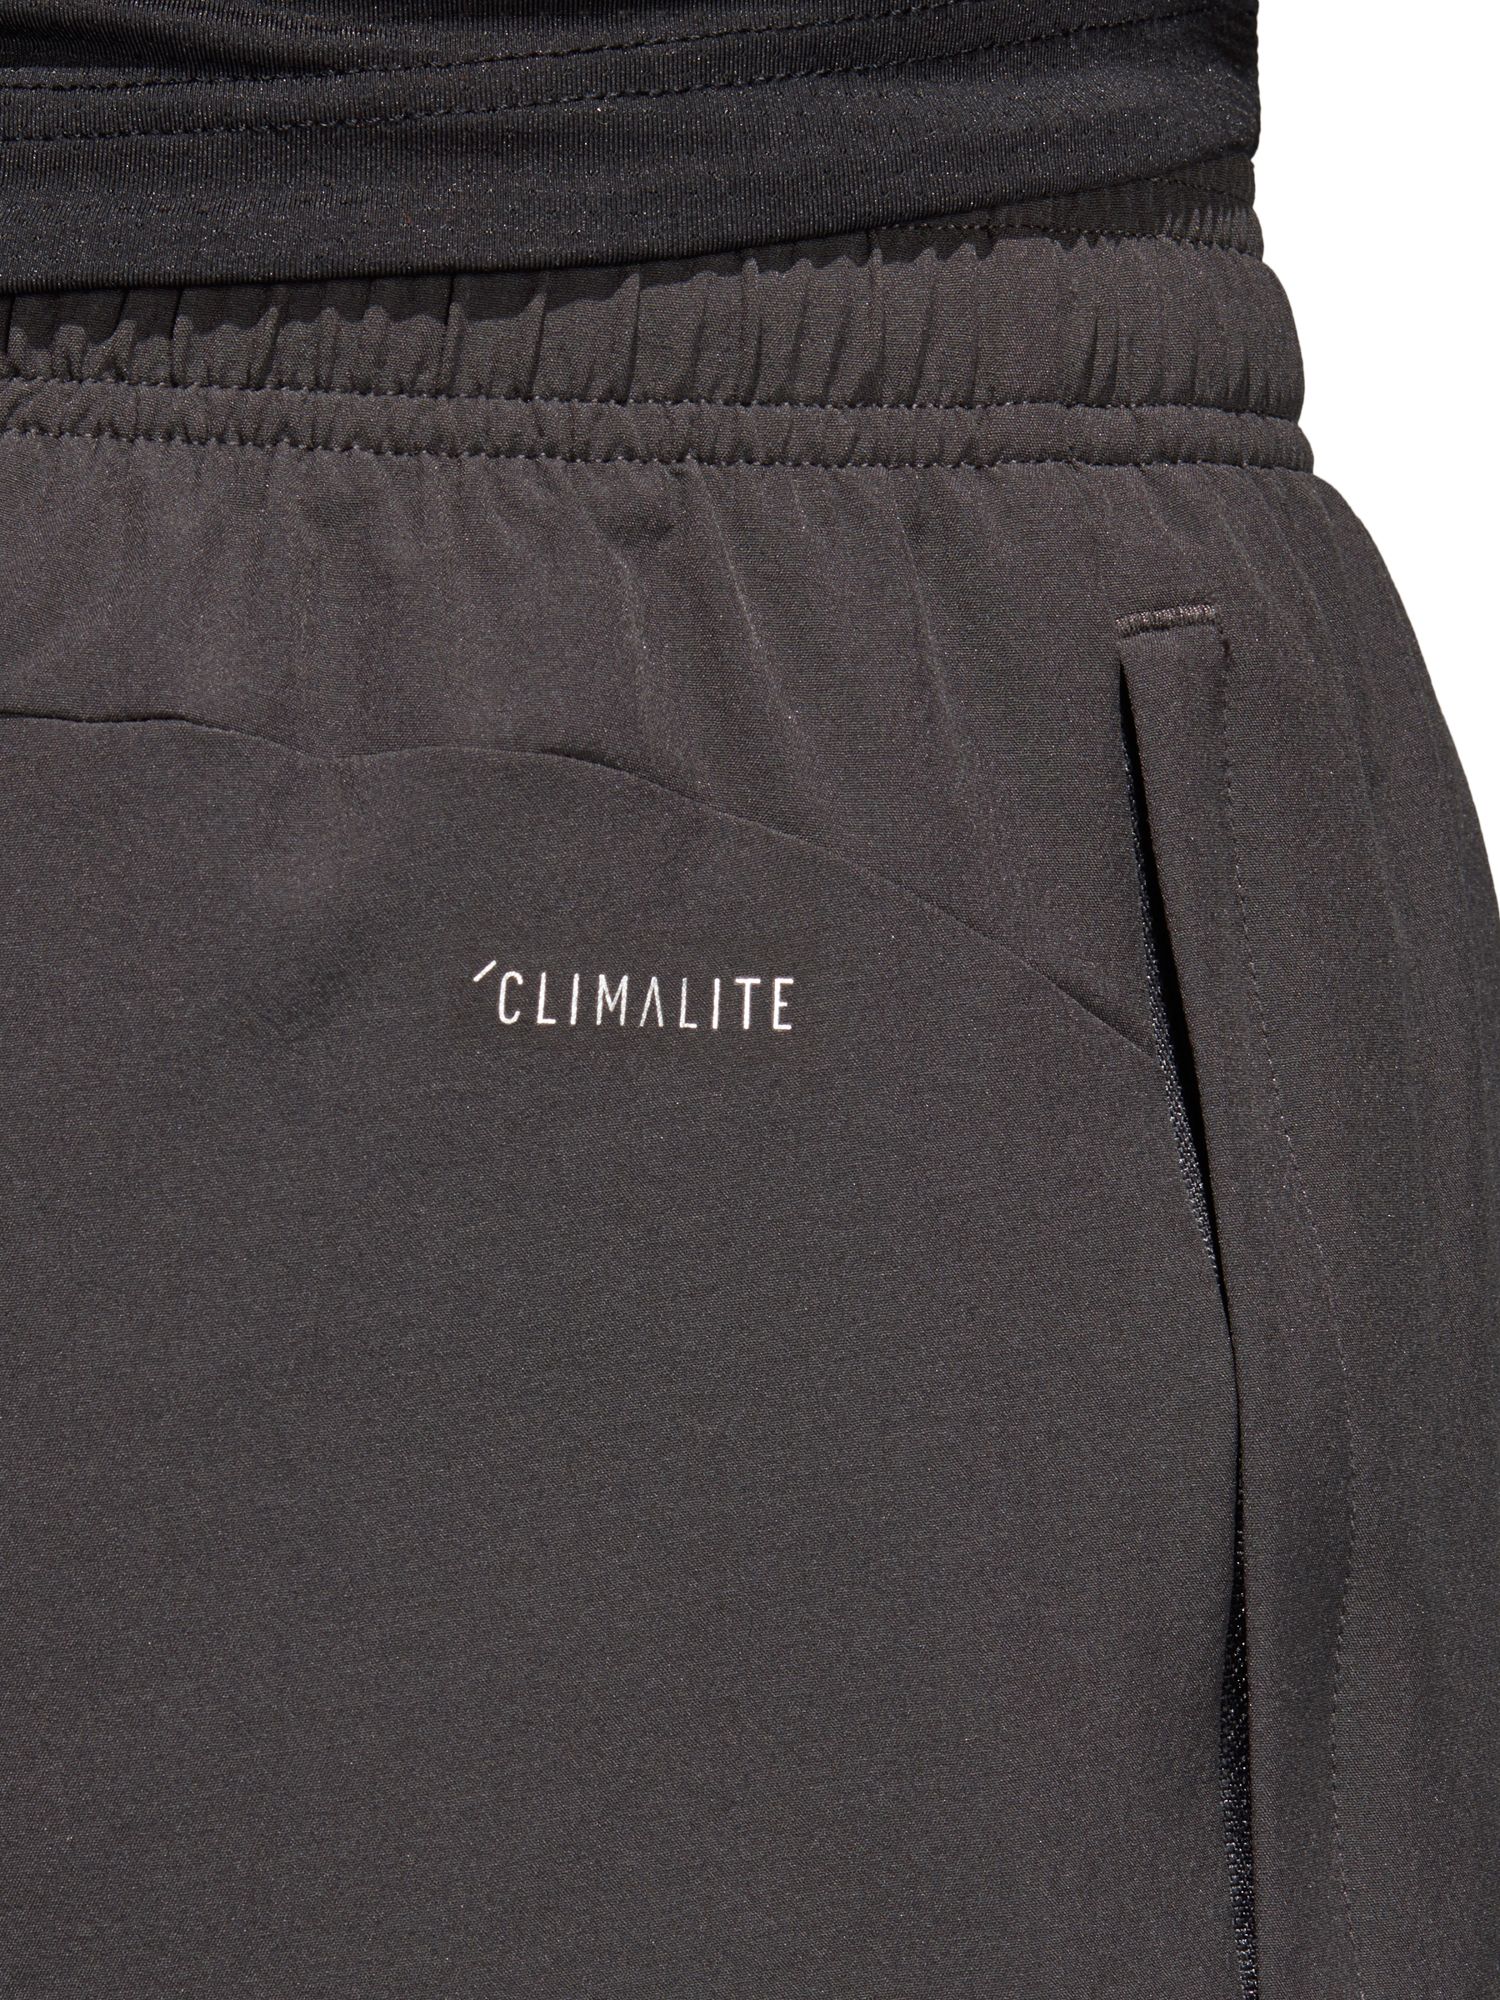 adidas climalite shorts with zip pockets